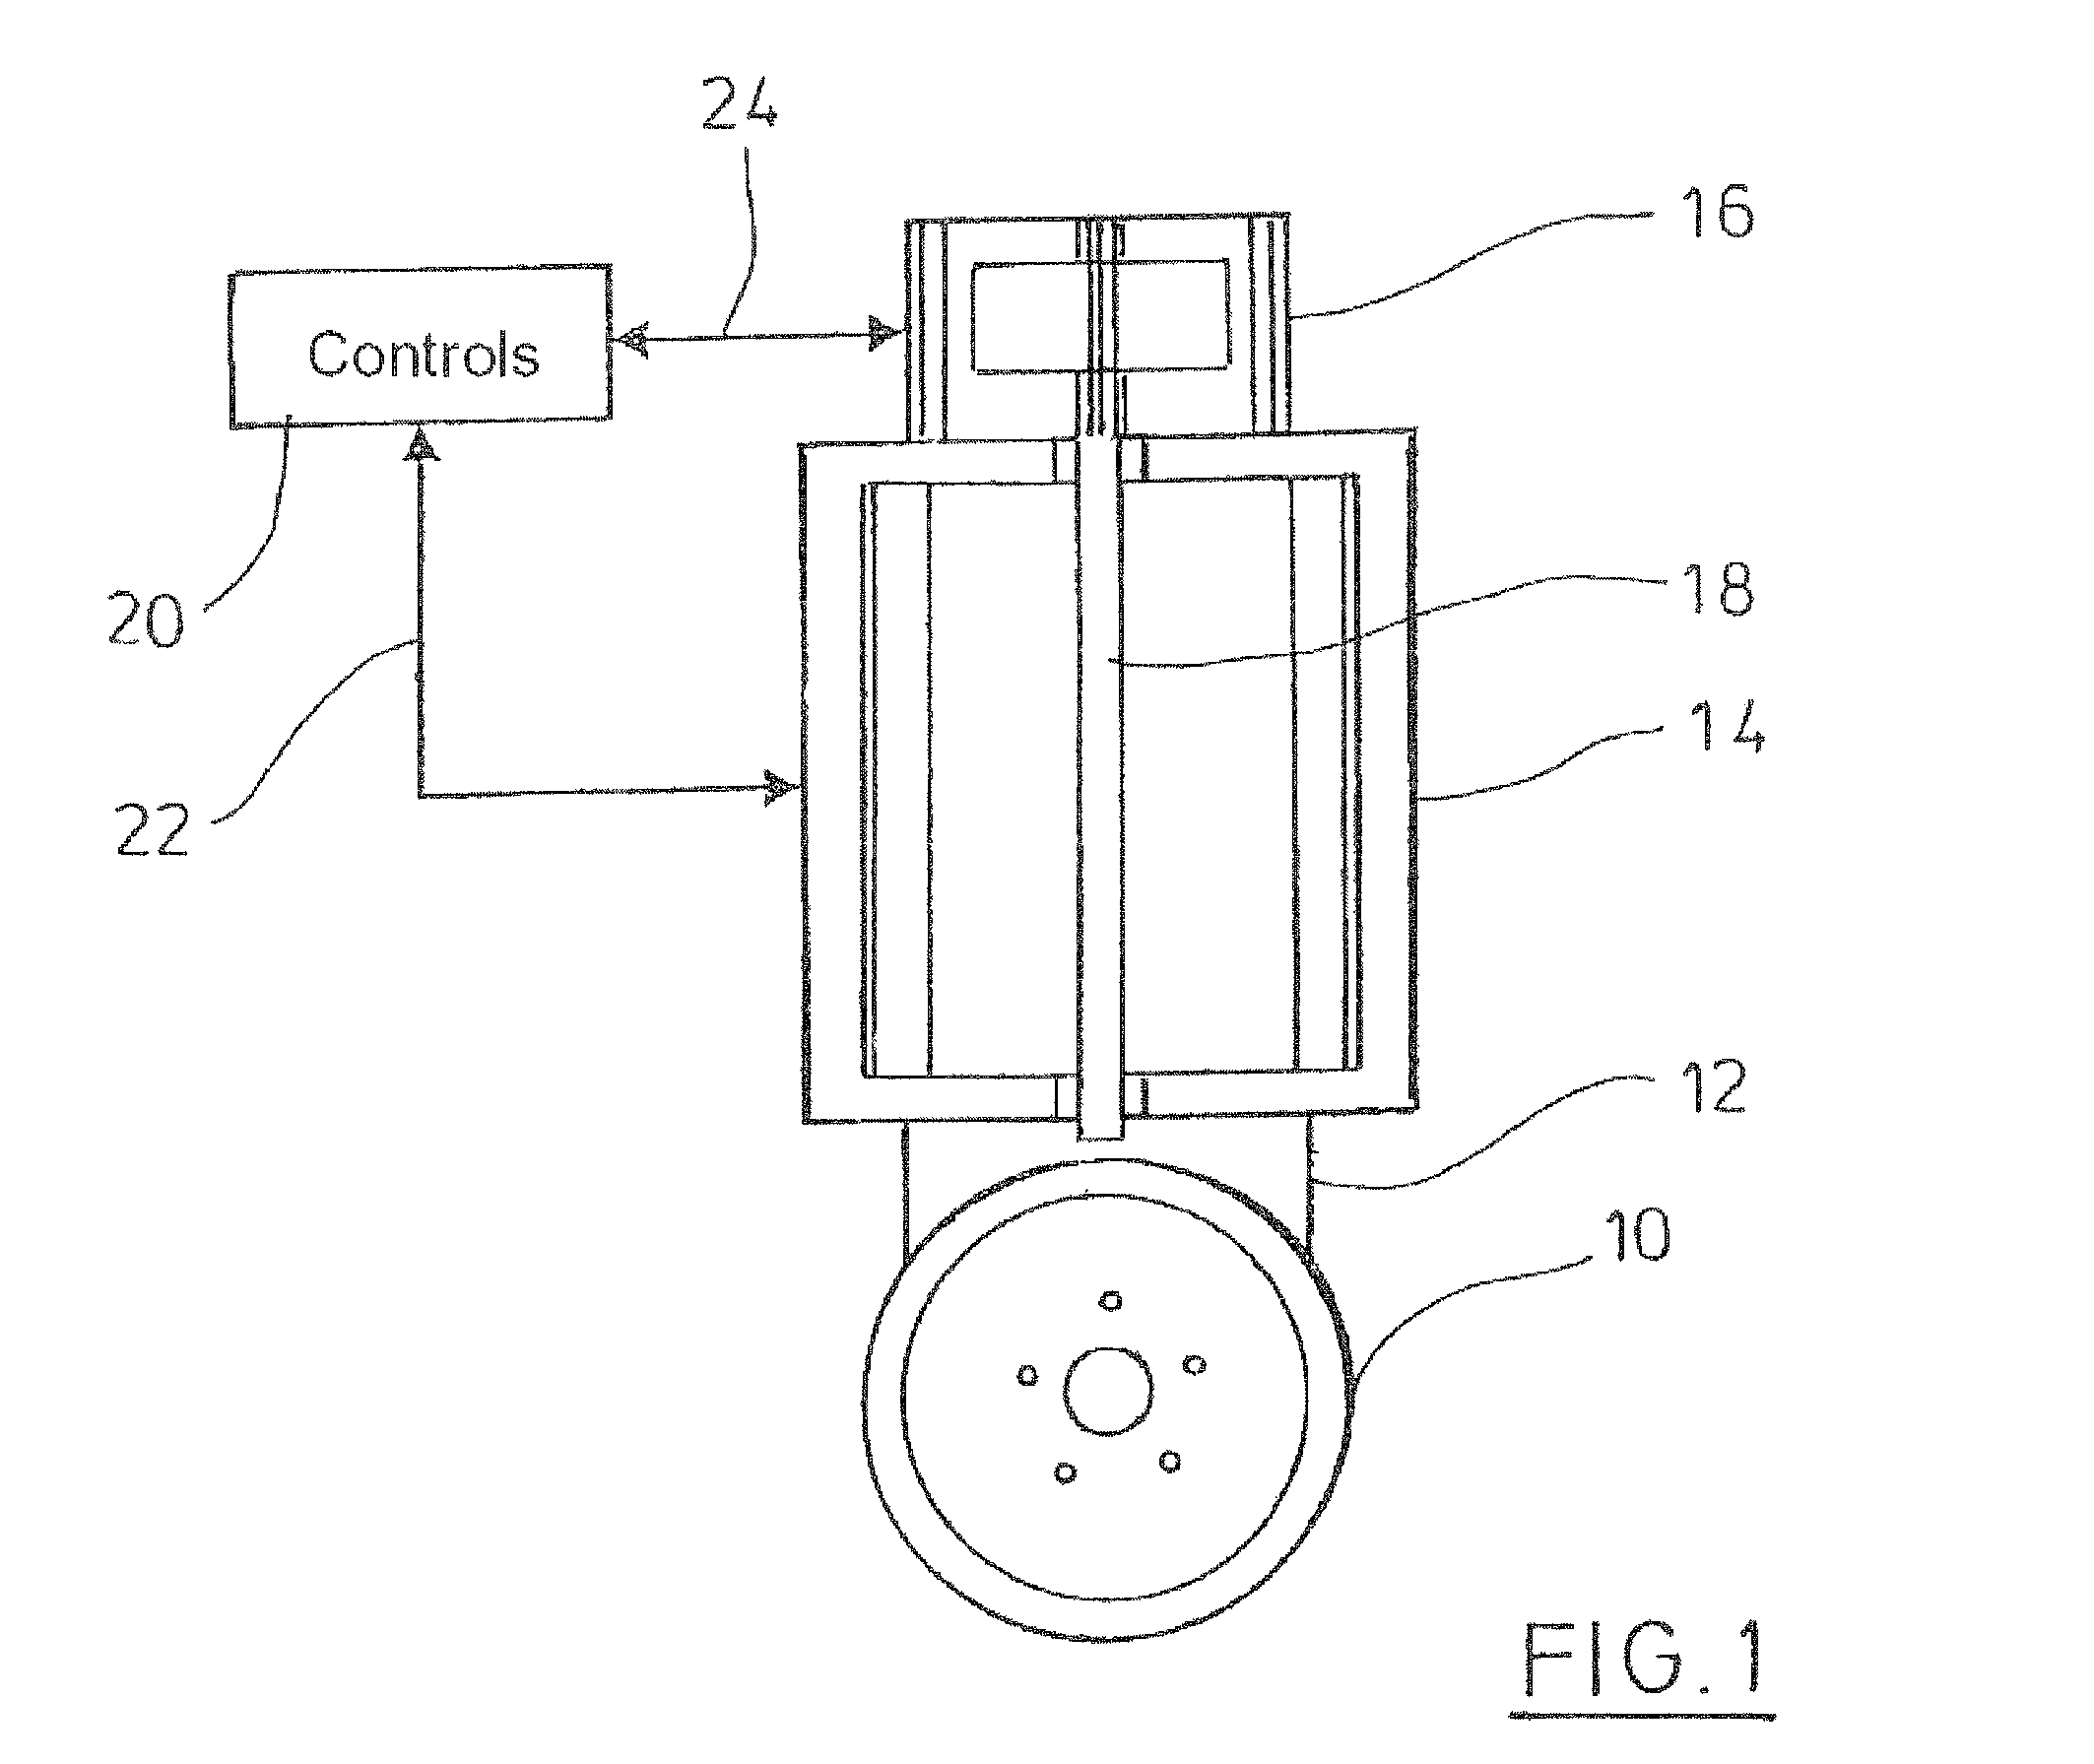 Industrial truck with an electric travel drive